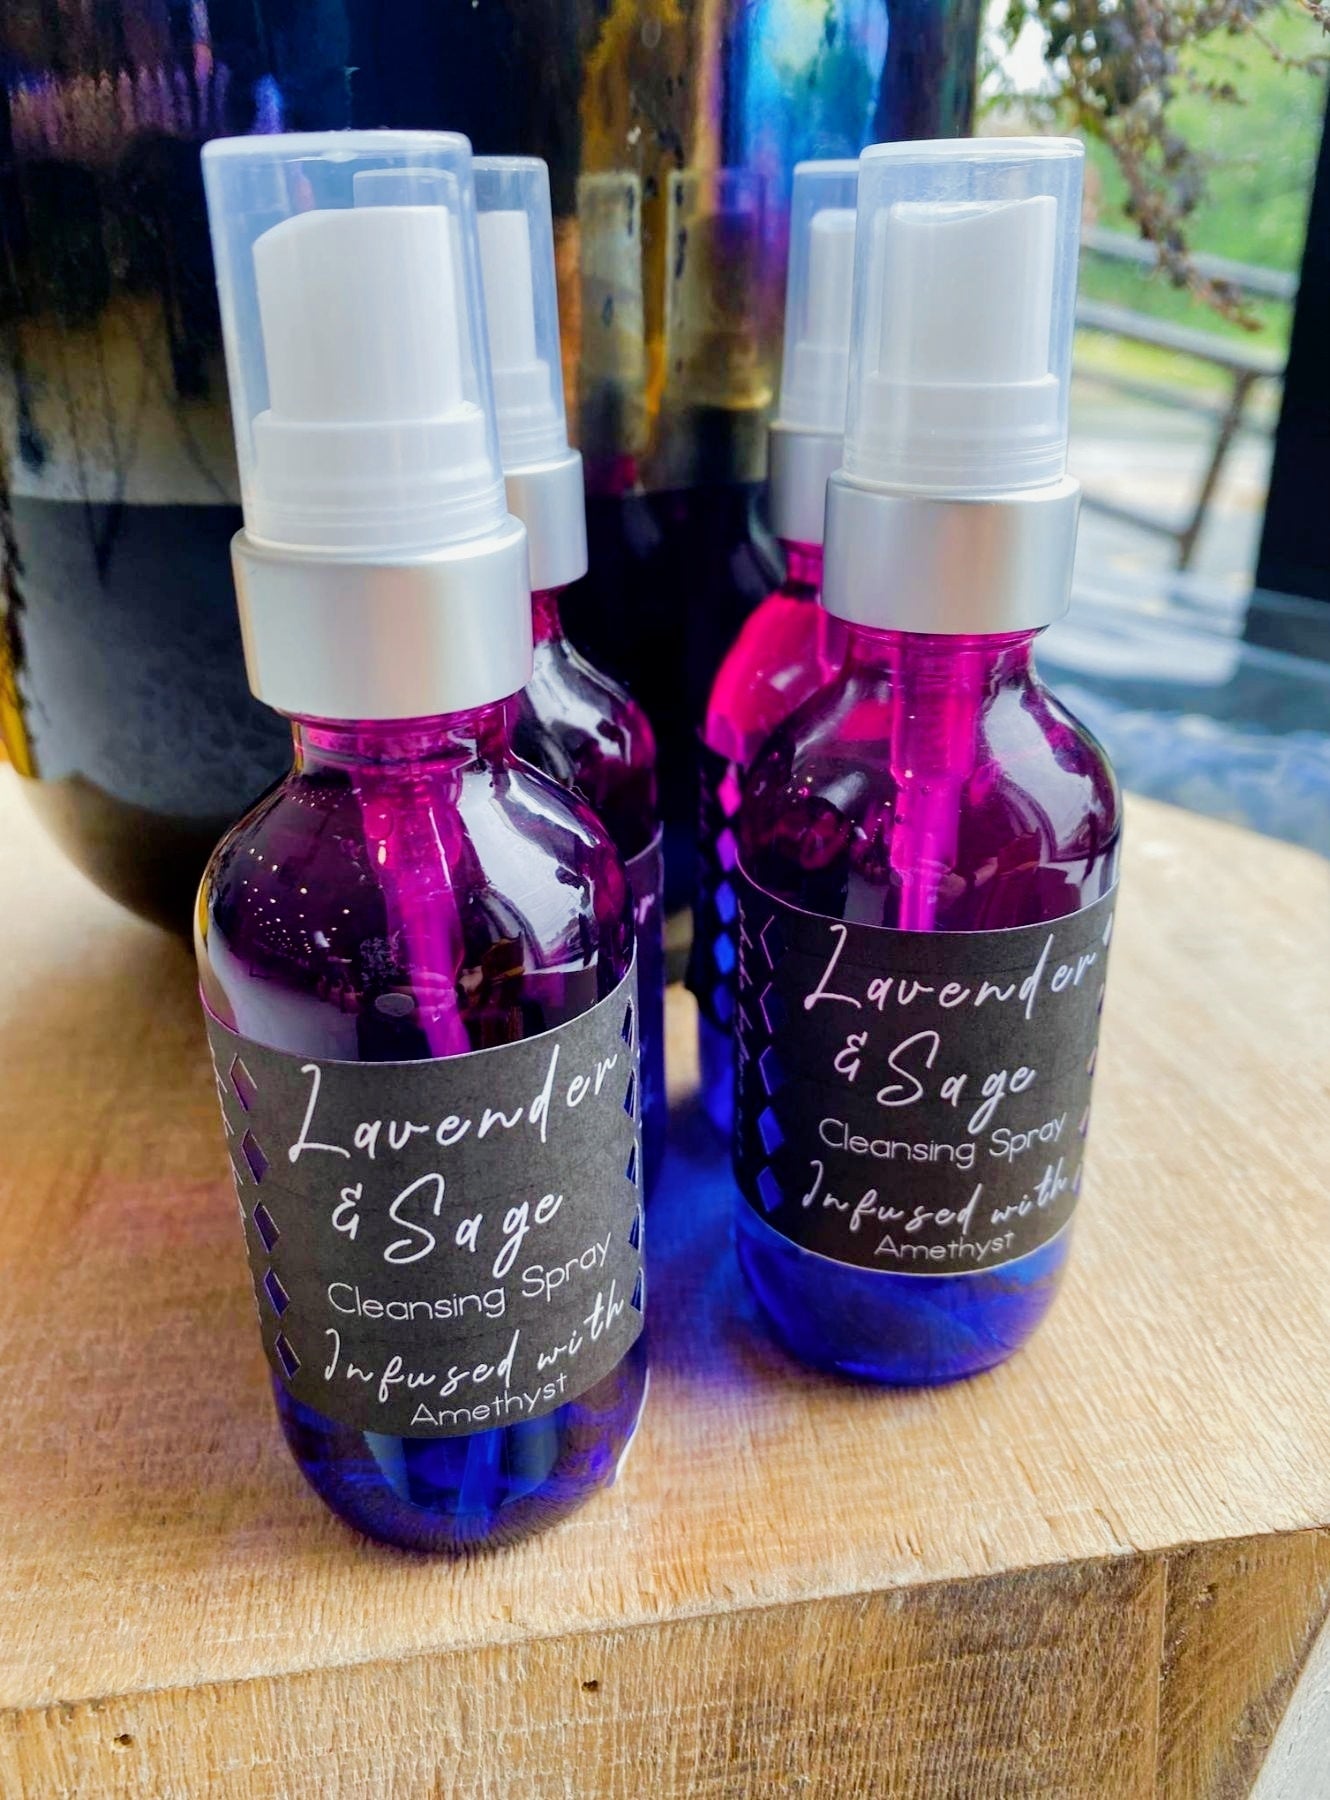 Our Lavender & Sage Cleansing Spray